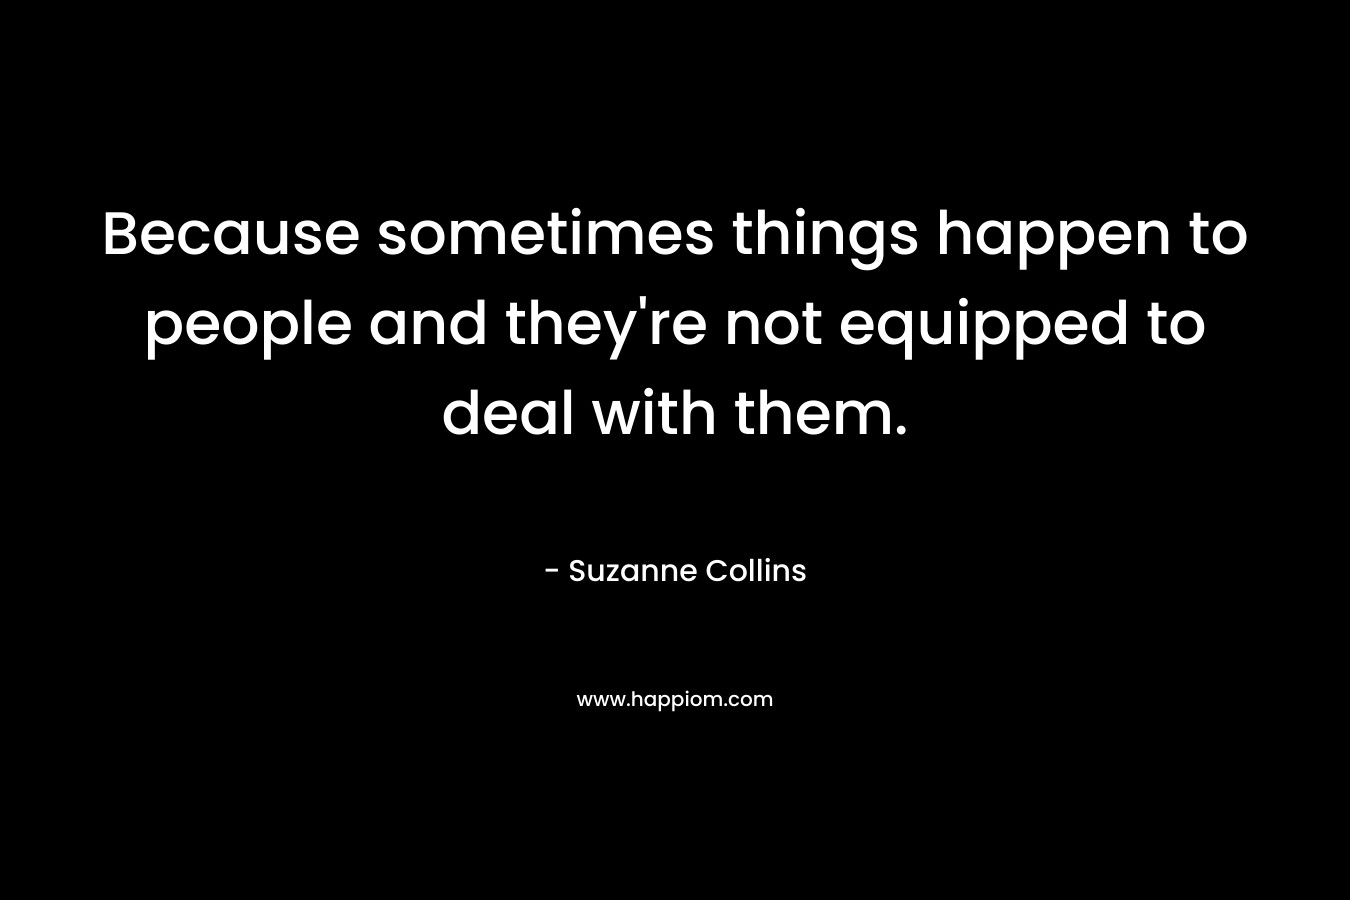 Because sometimes things happen to people and they're not equipped to deal with them.